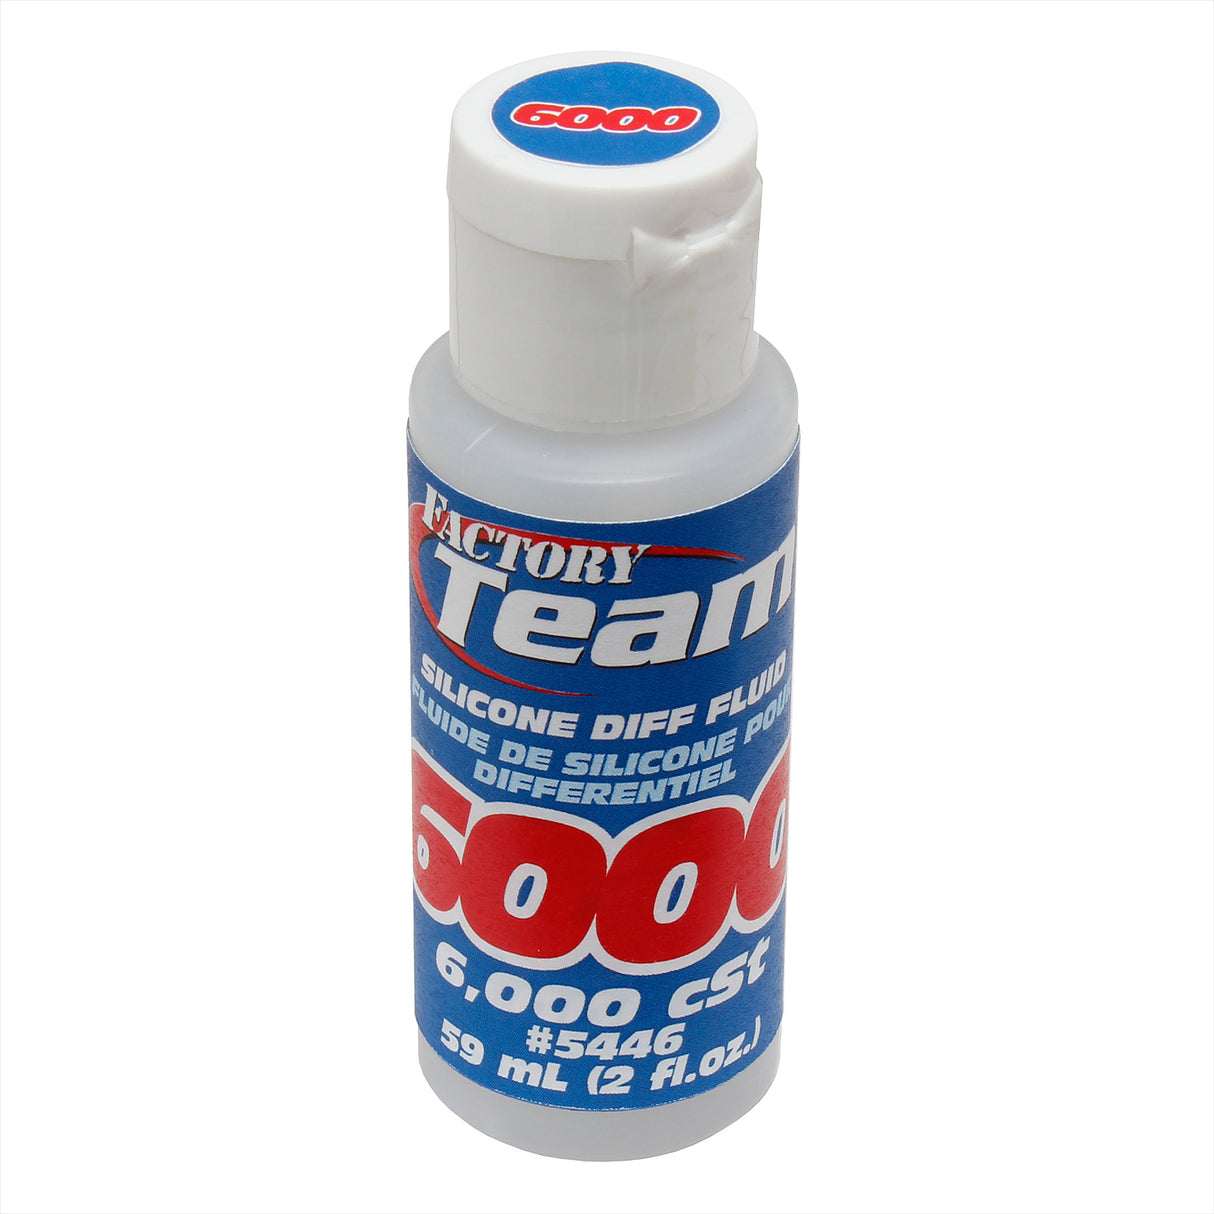 Team Associated Silicone Diff Oil 6000Cst 59ml